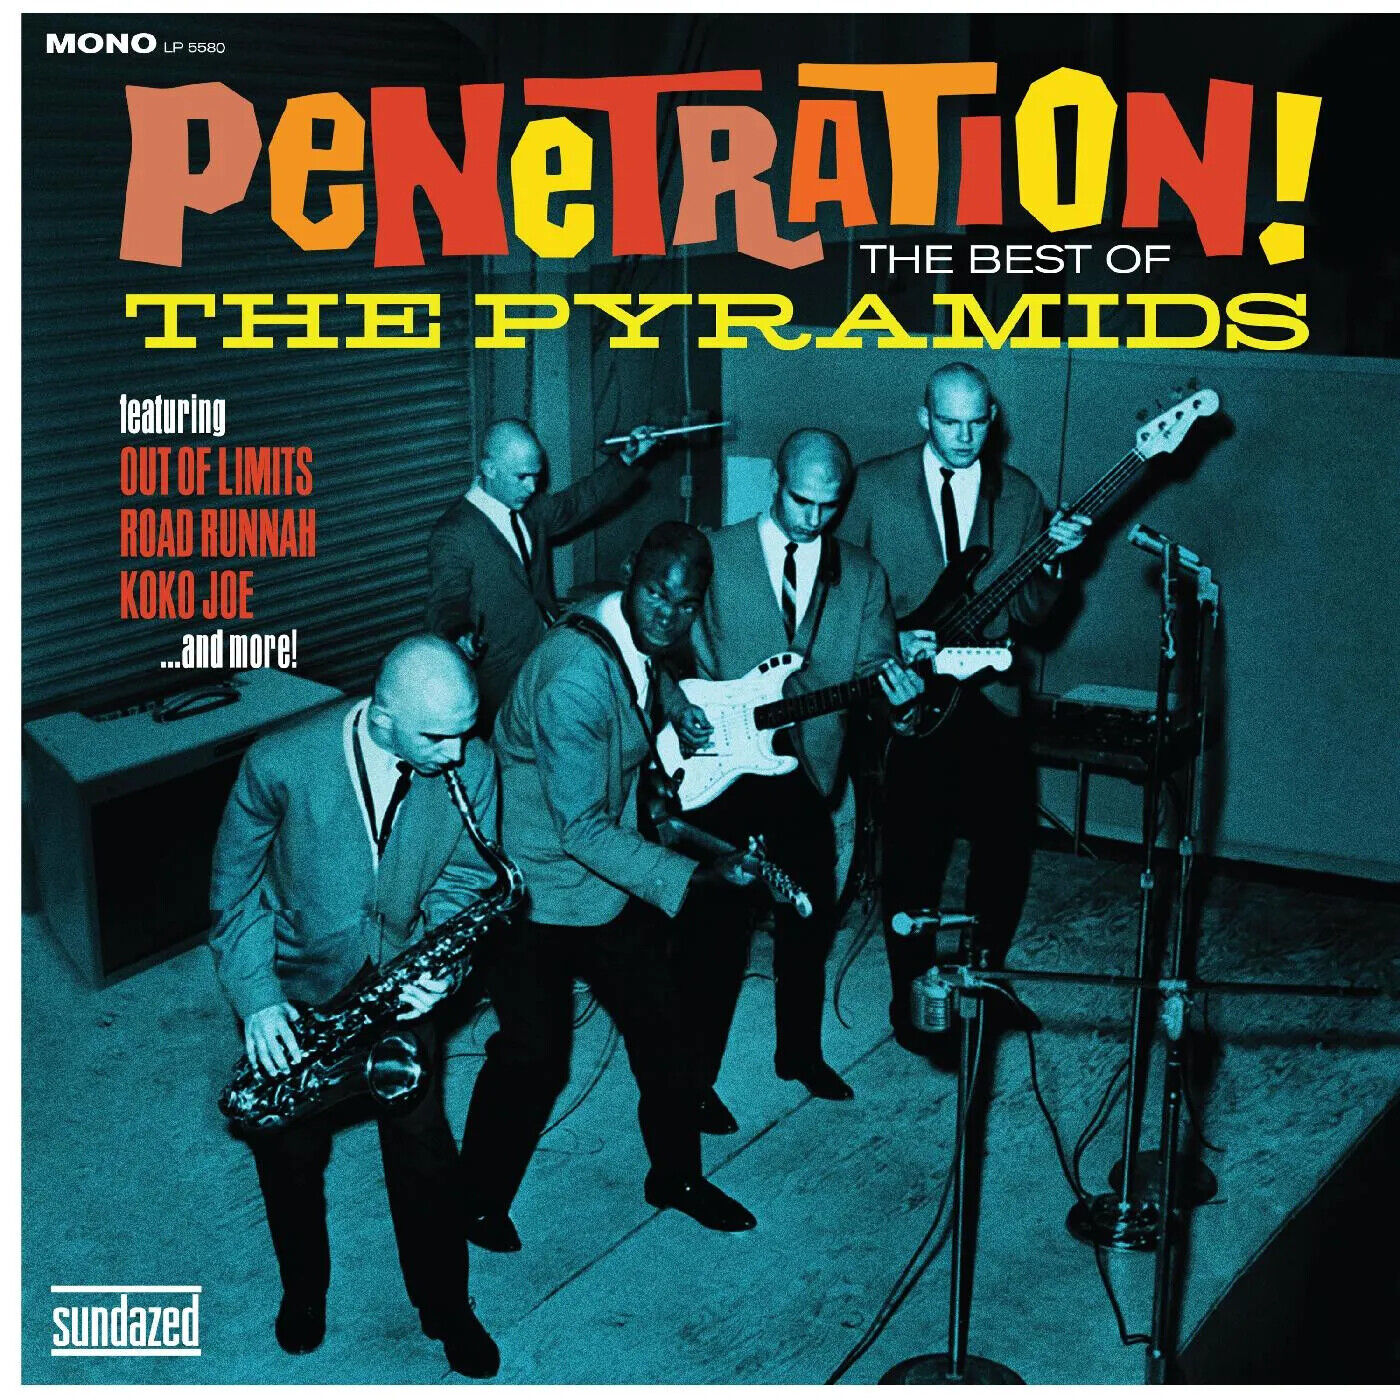 The Pyramids | Turquoise Vinyl LP | Penetration The Best Of The